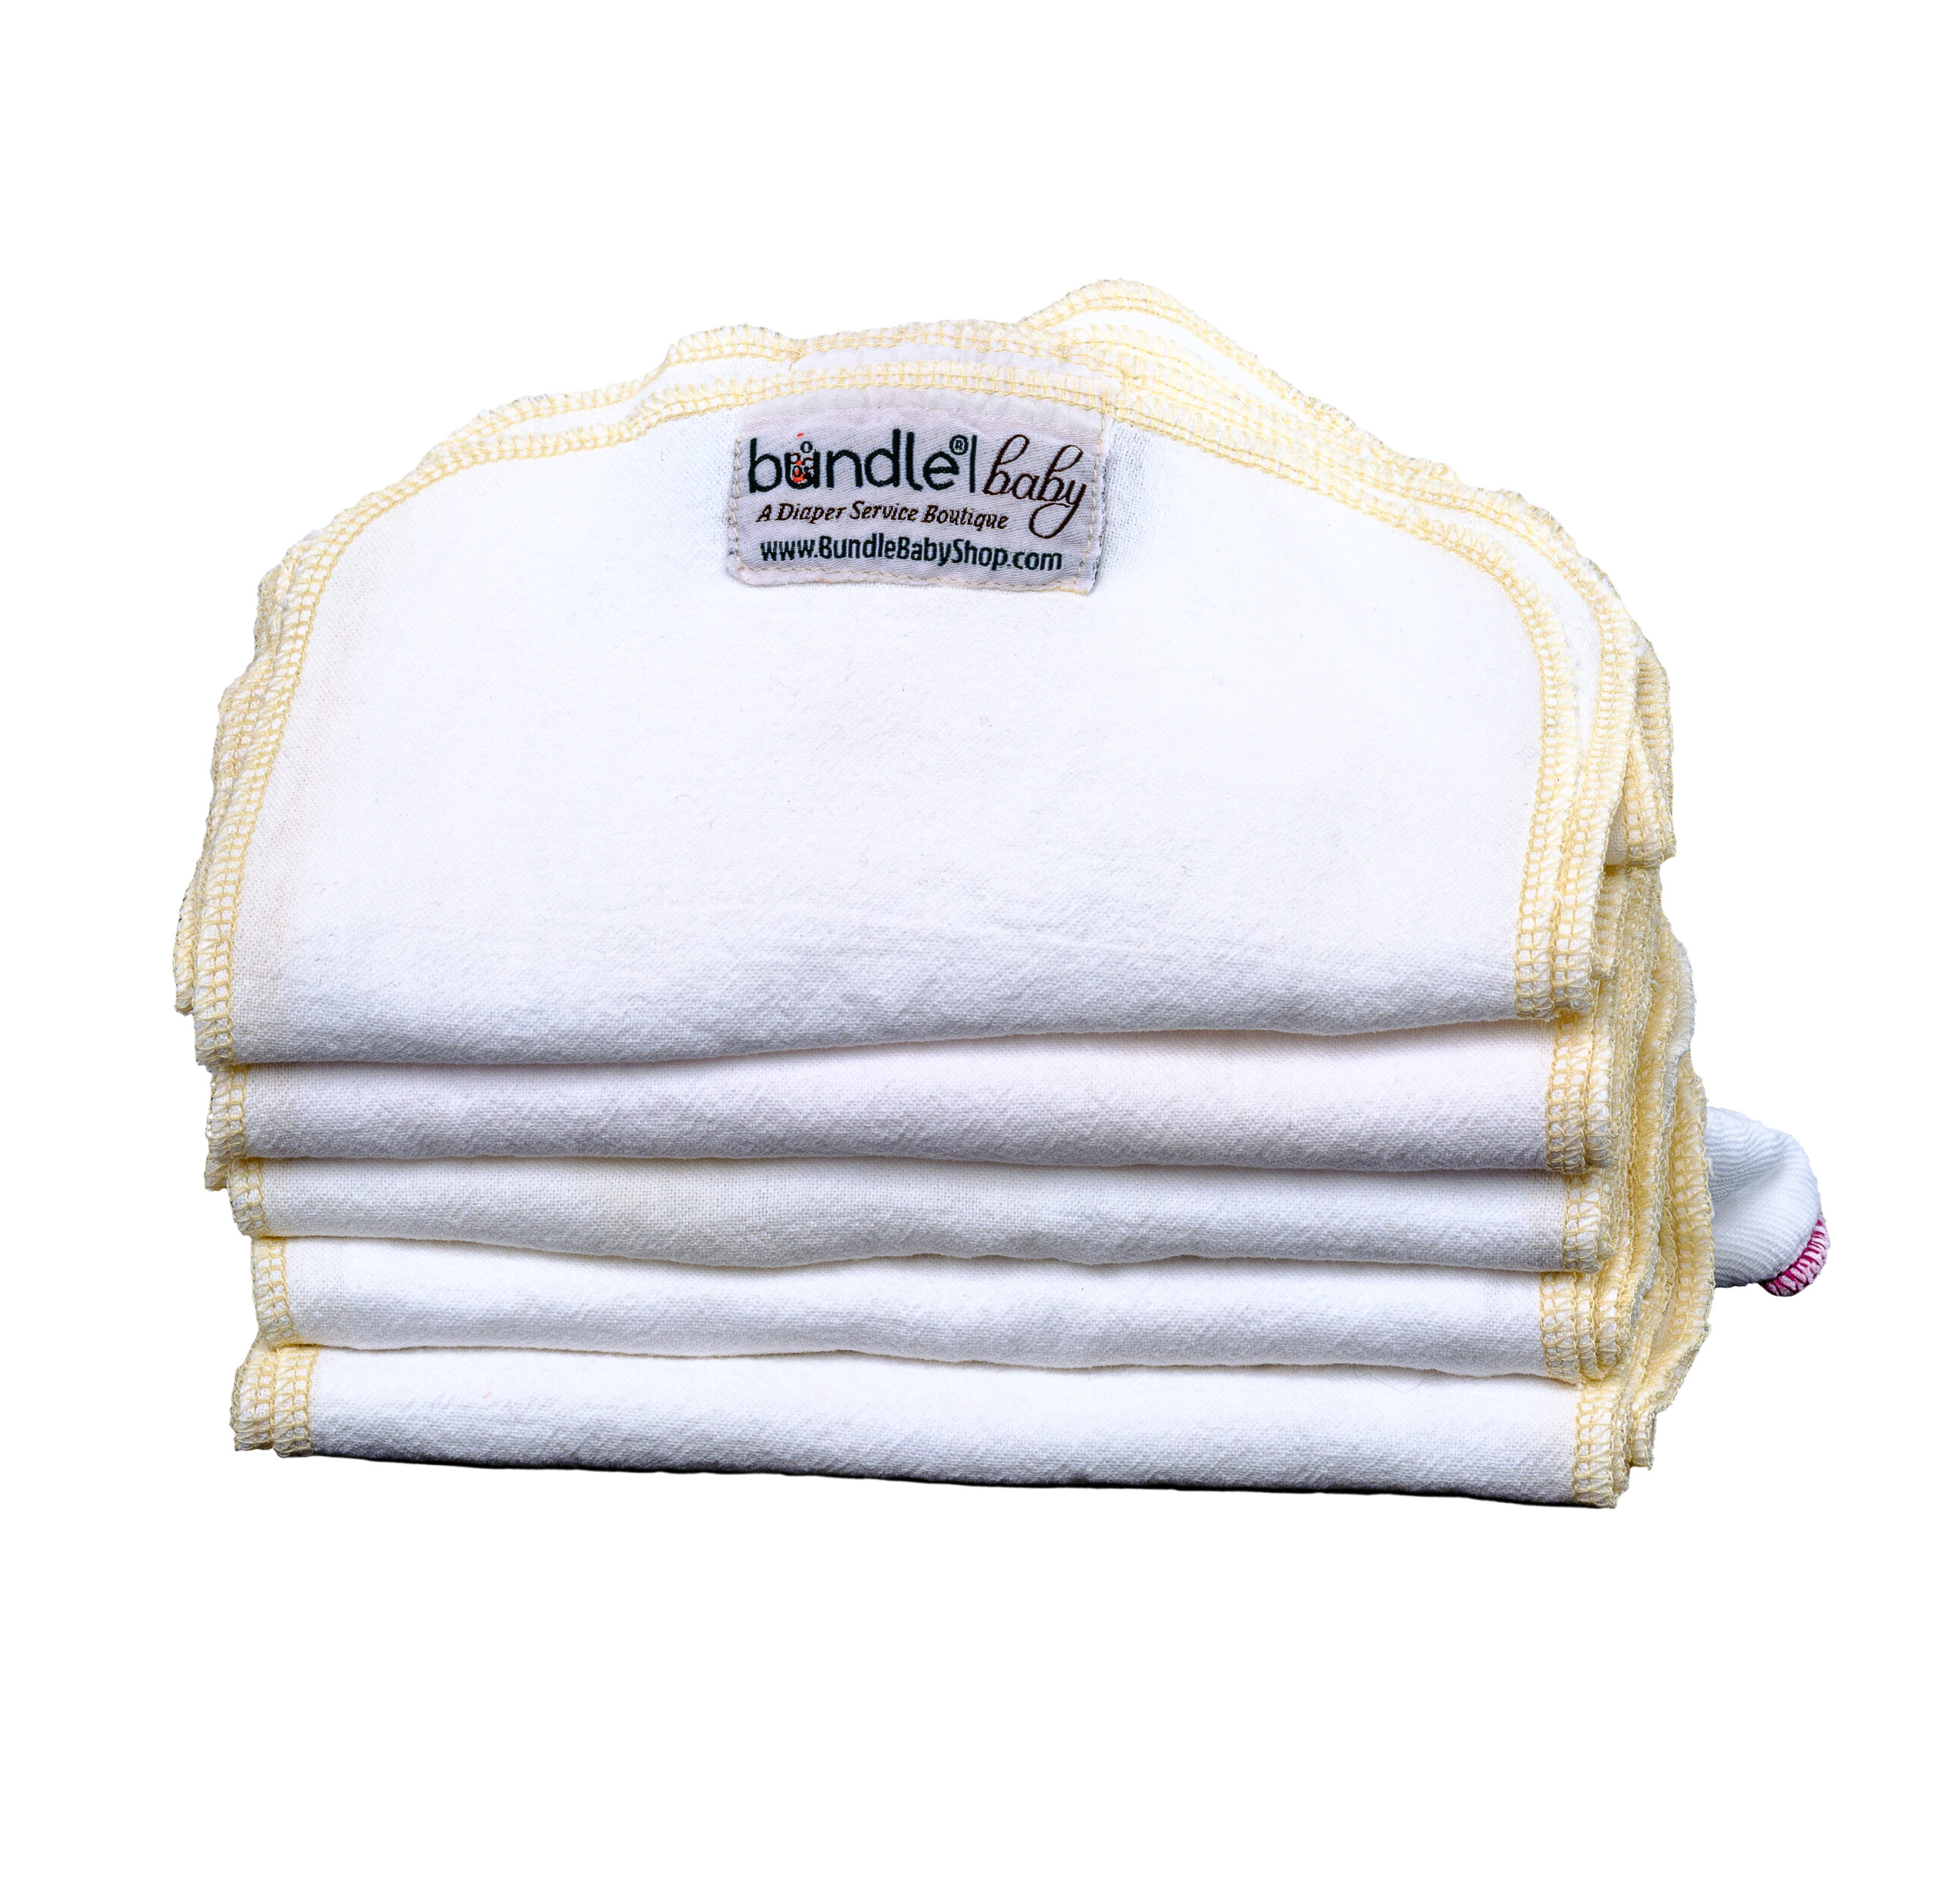 Stack of Bundle Baby cloth wipes for use with cloth diapers